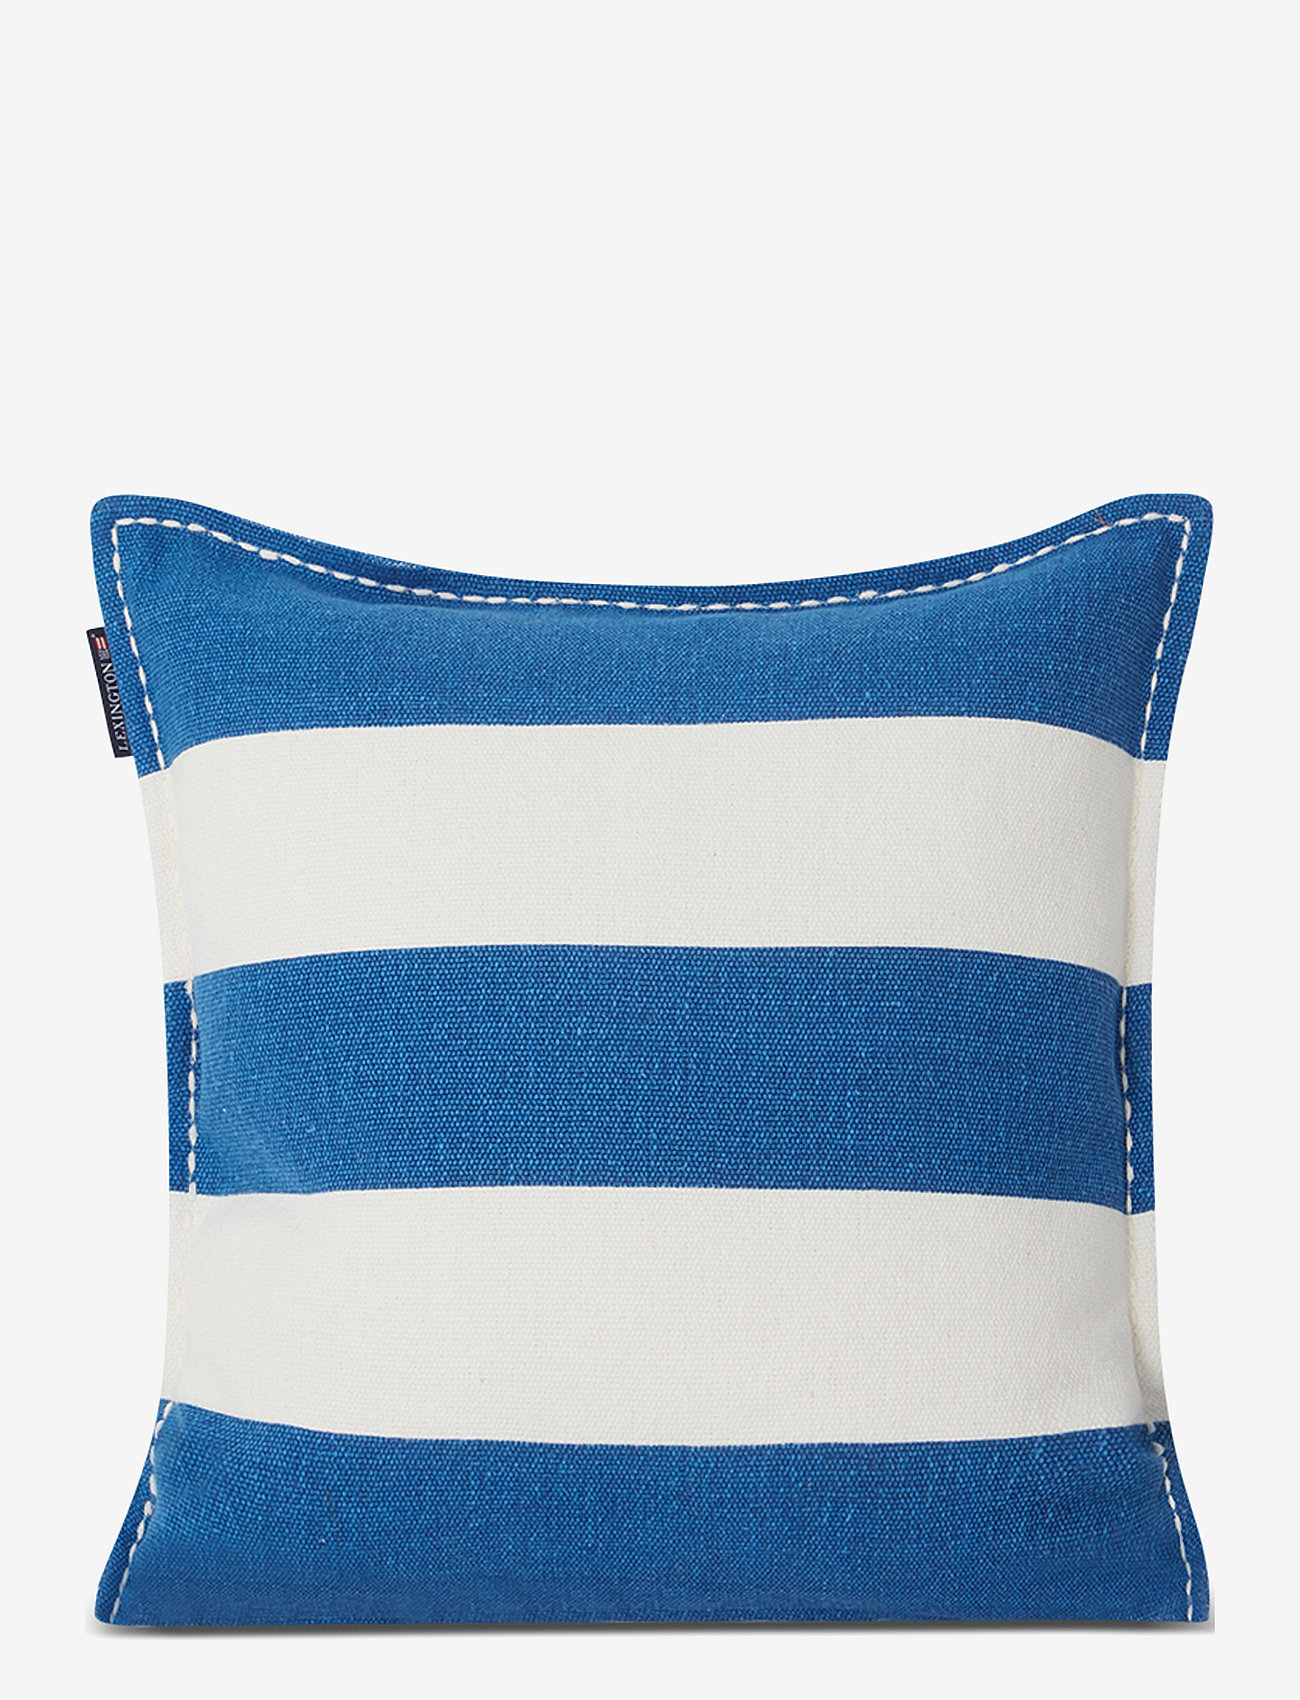 Lexington Home - Block Stripe Printed Recycled Cotton Pillow Cover - padjakatted - blue/white - 1